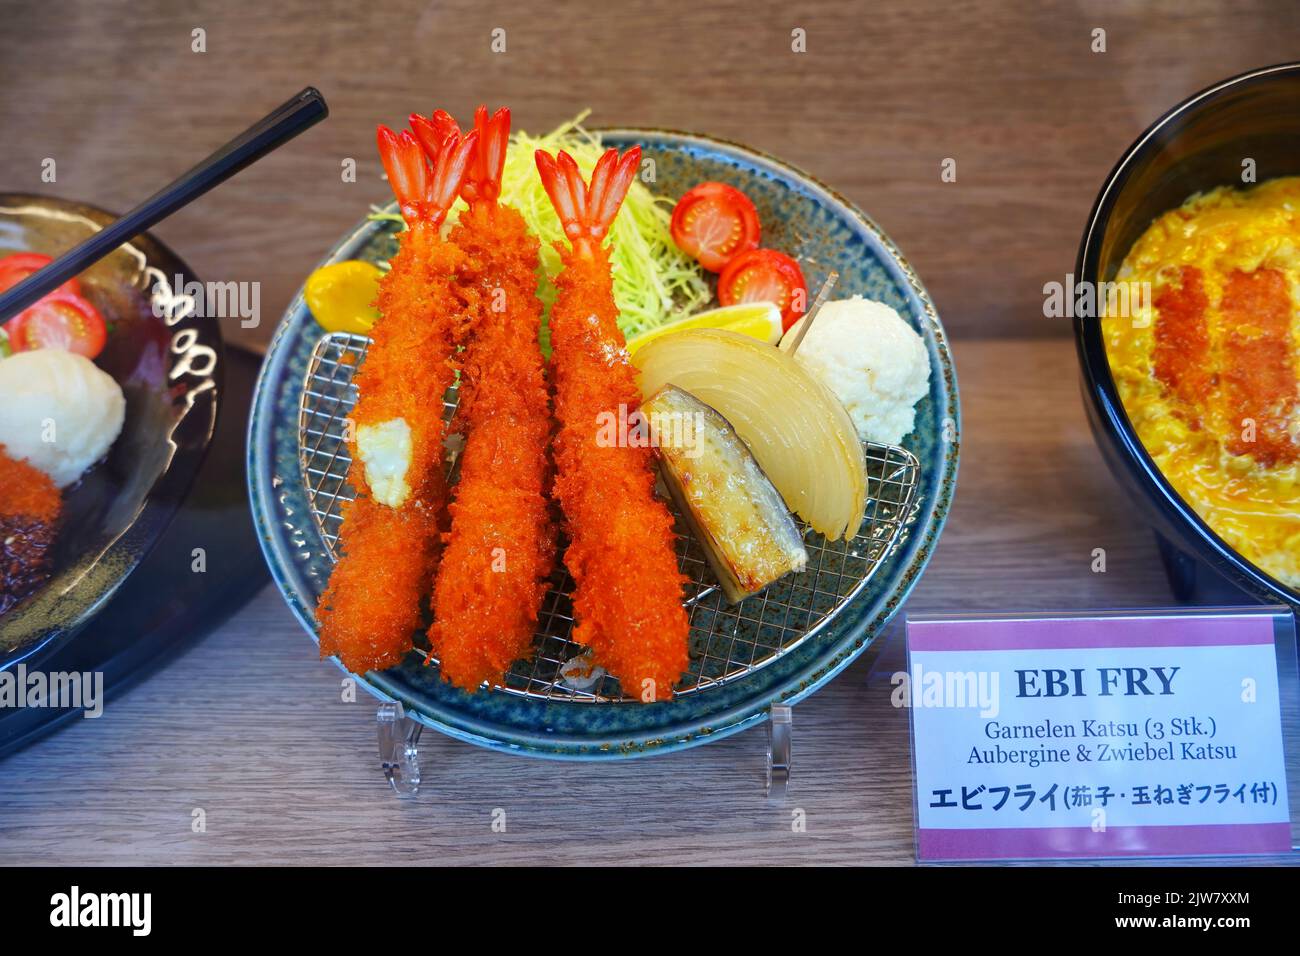 Food sample of a Japanese ebi fry dish displayed in the window of a restaurant in the Japanese quarter in Düsseldorf/Germany. Stock Photo